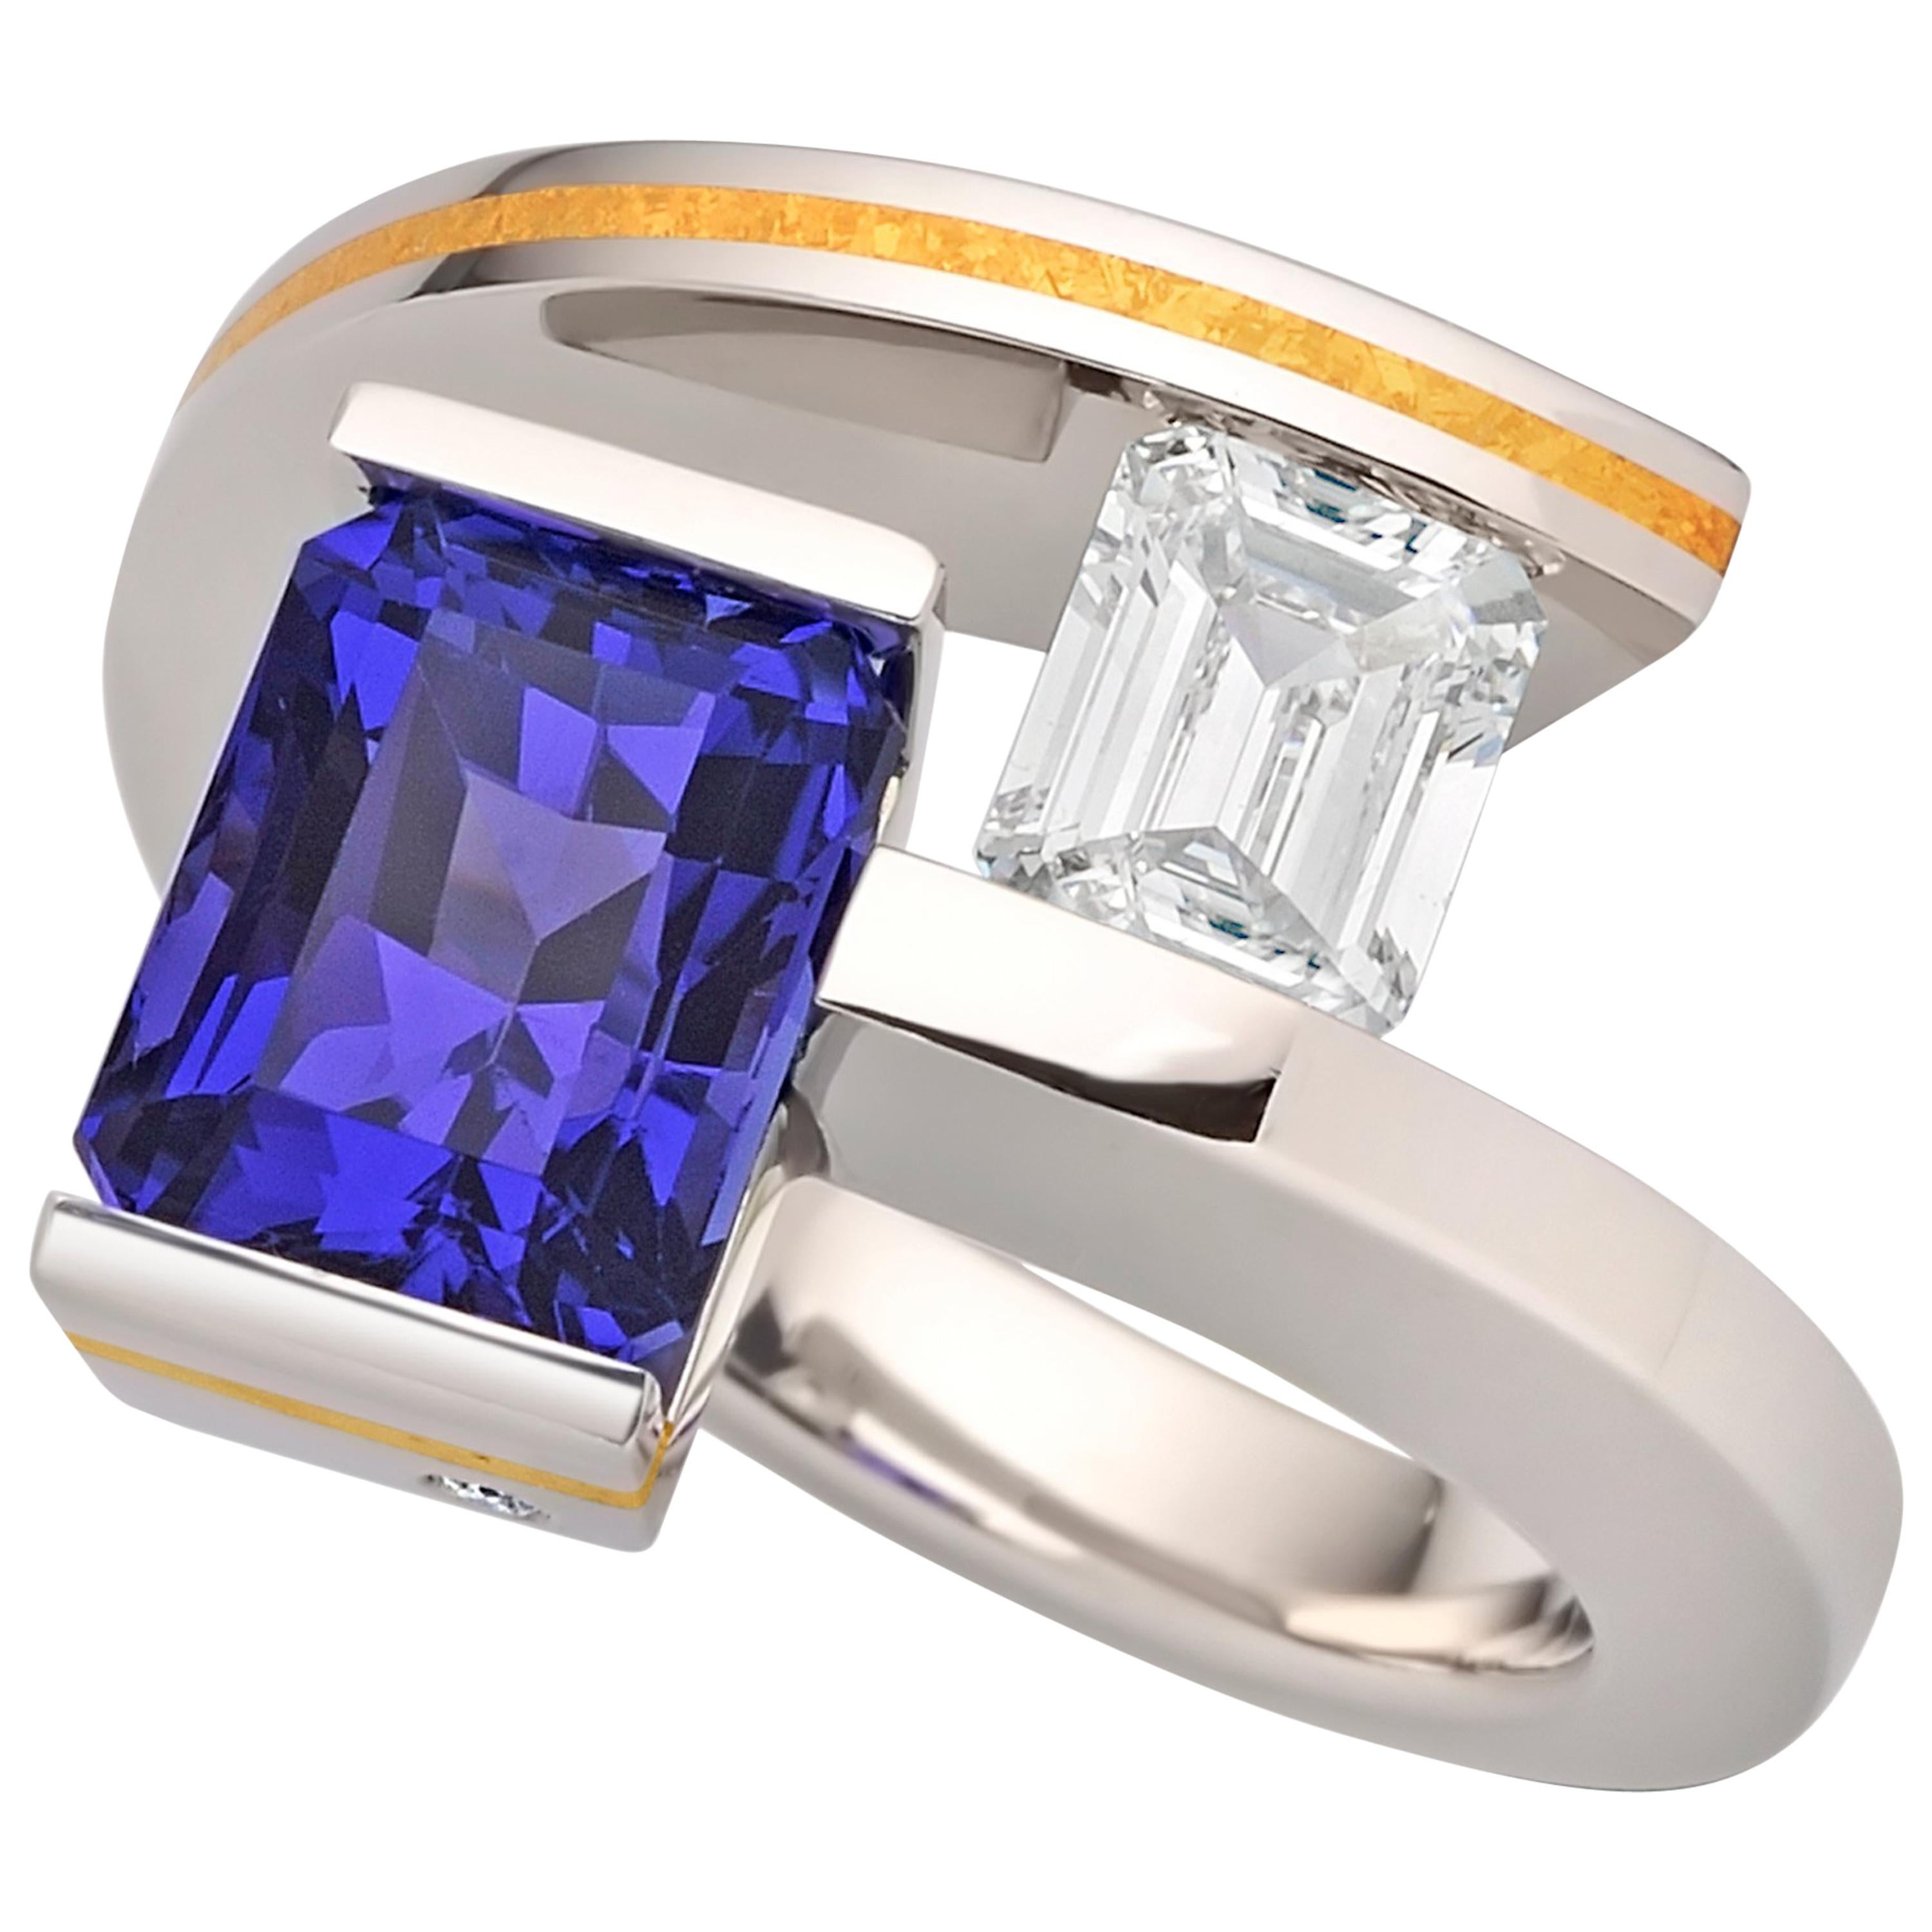 Steven Kretchmer 2-Stone Helix Ring with a Tanzanite and Tension-set Diamond  For Sale